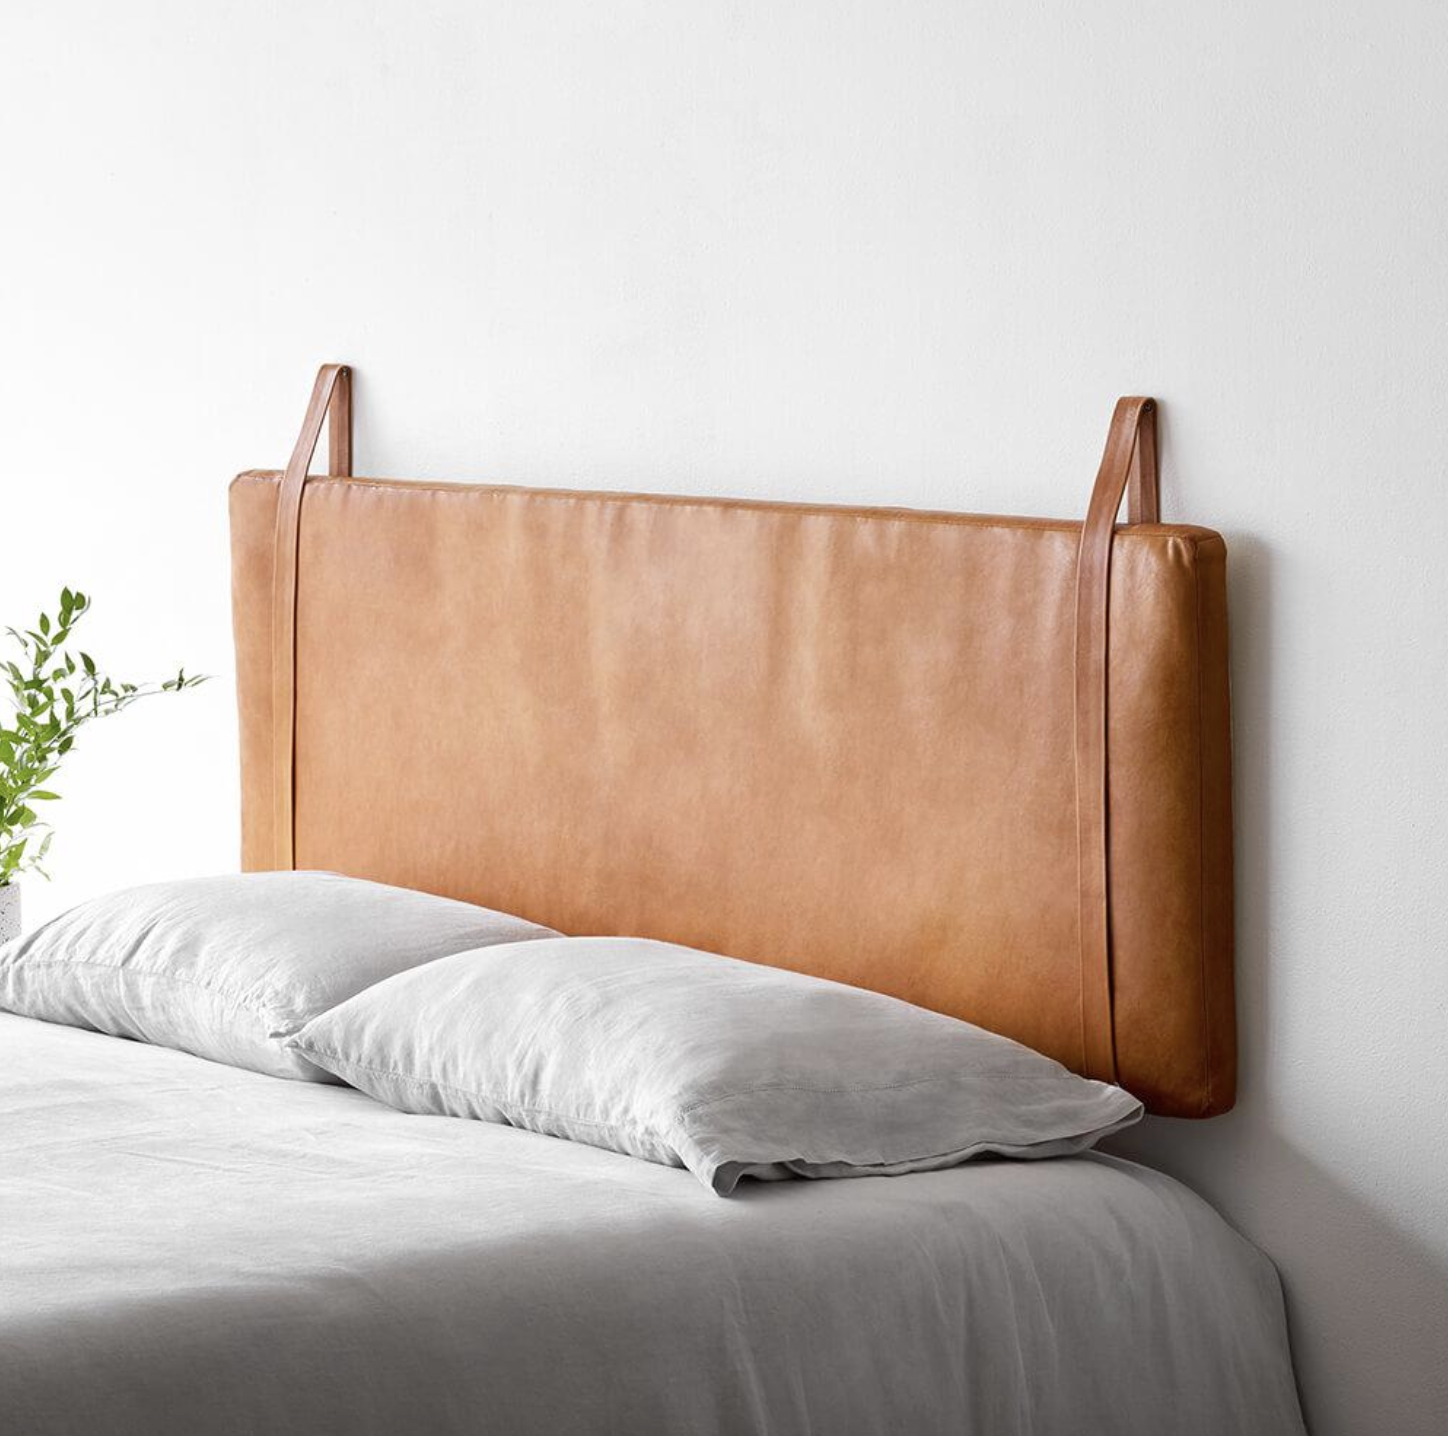 9 Wall Mounted Floating Headboards We, How Do You Mount A Headboard To The Wall